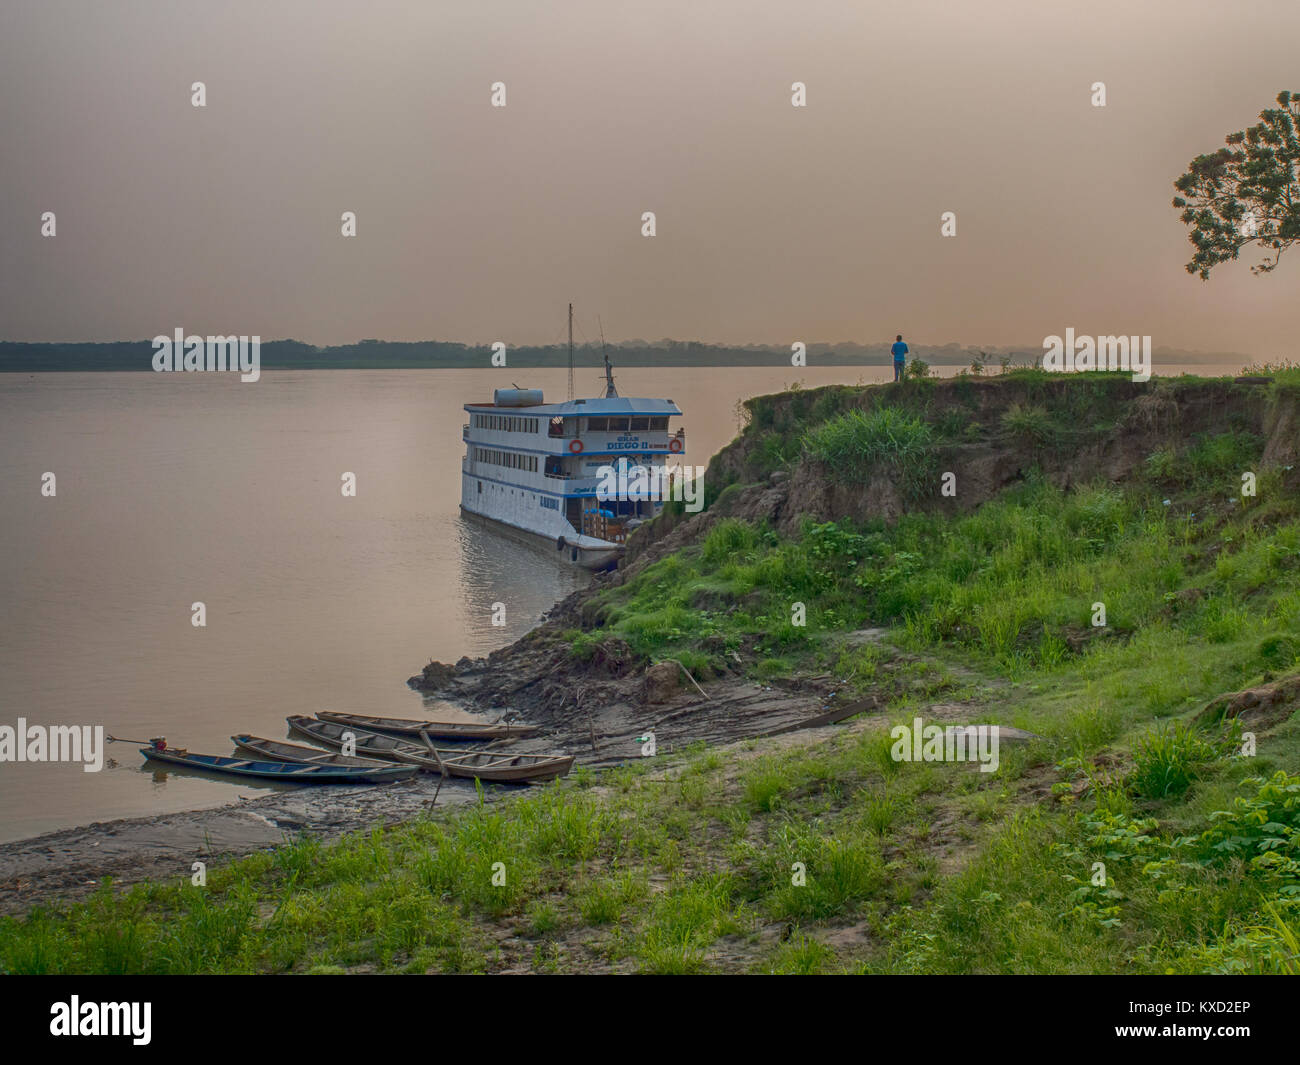 Caballococha, Peru - Sep 19, 2017: Cargo boat in the port on the Amazon river during the low water season Stock Photo